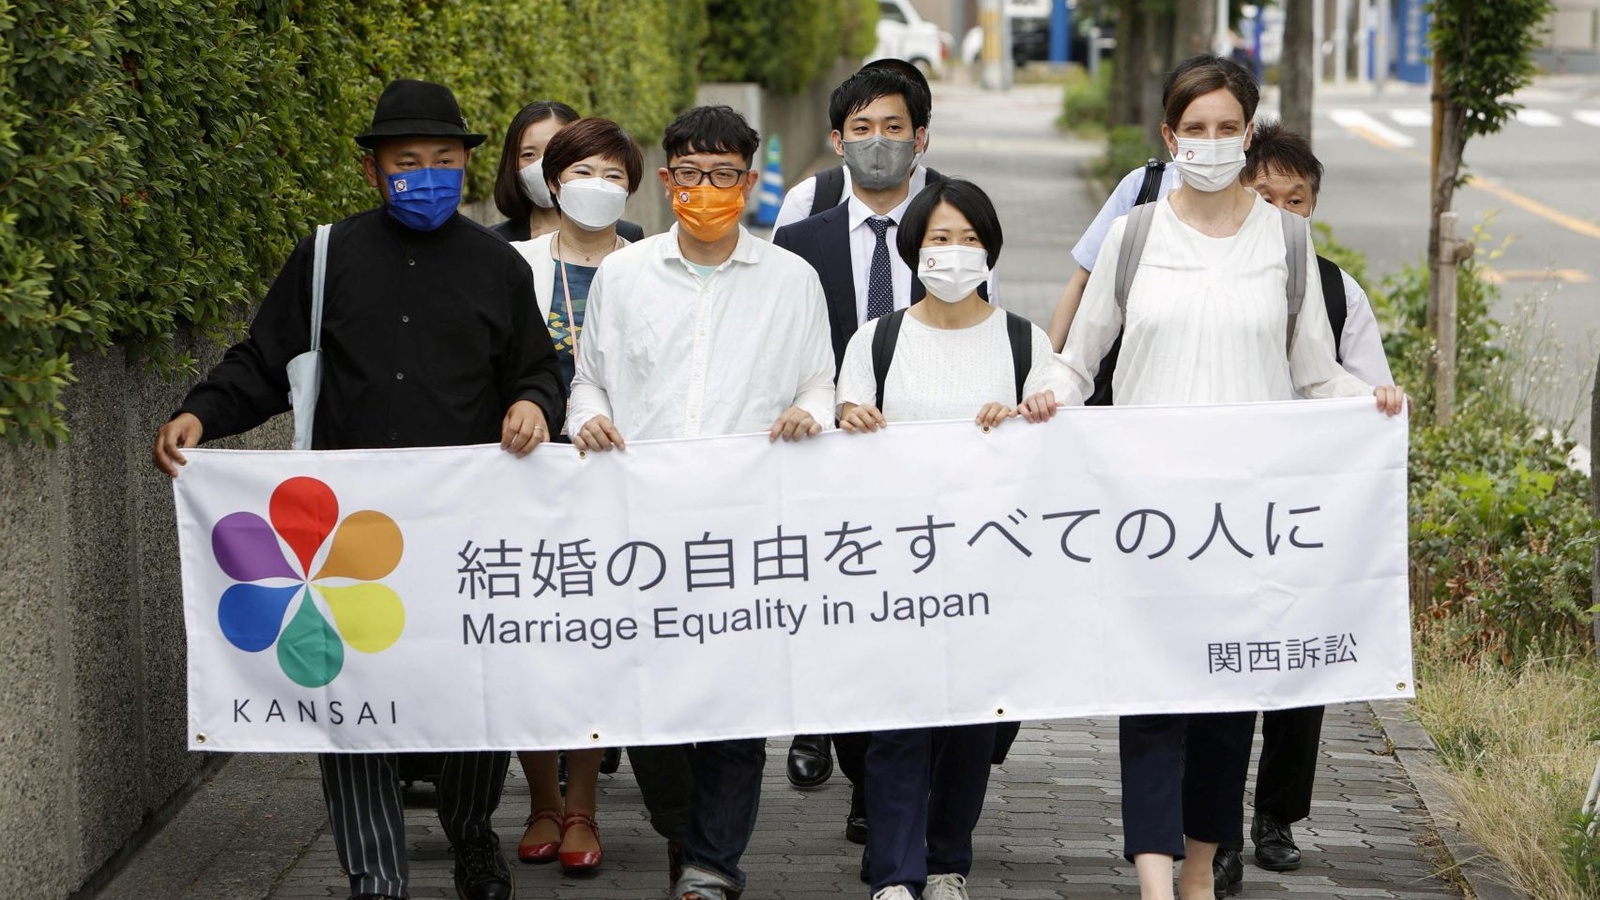 Mixed Messages From Japanese Courts on Same-Sex Marriage Council on Foreign Relations image